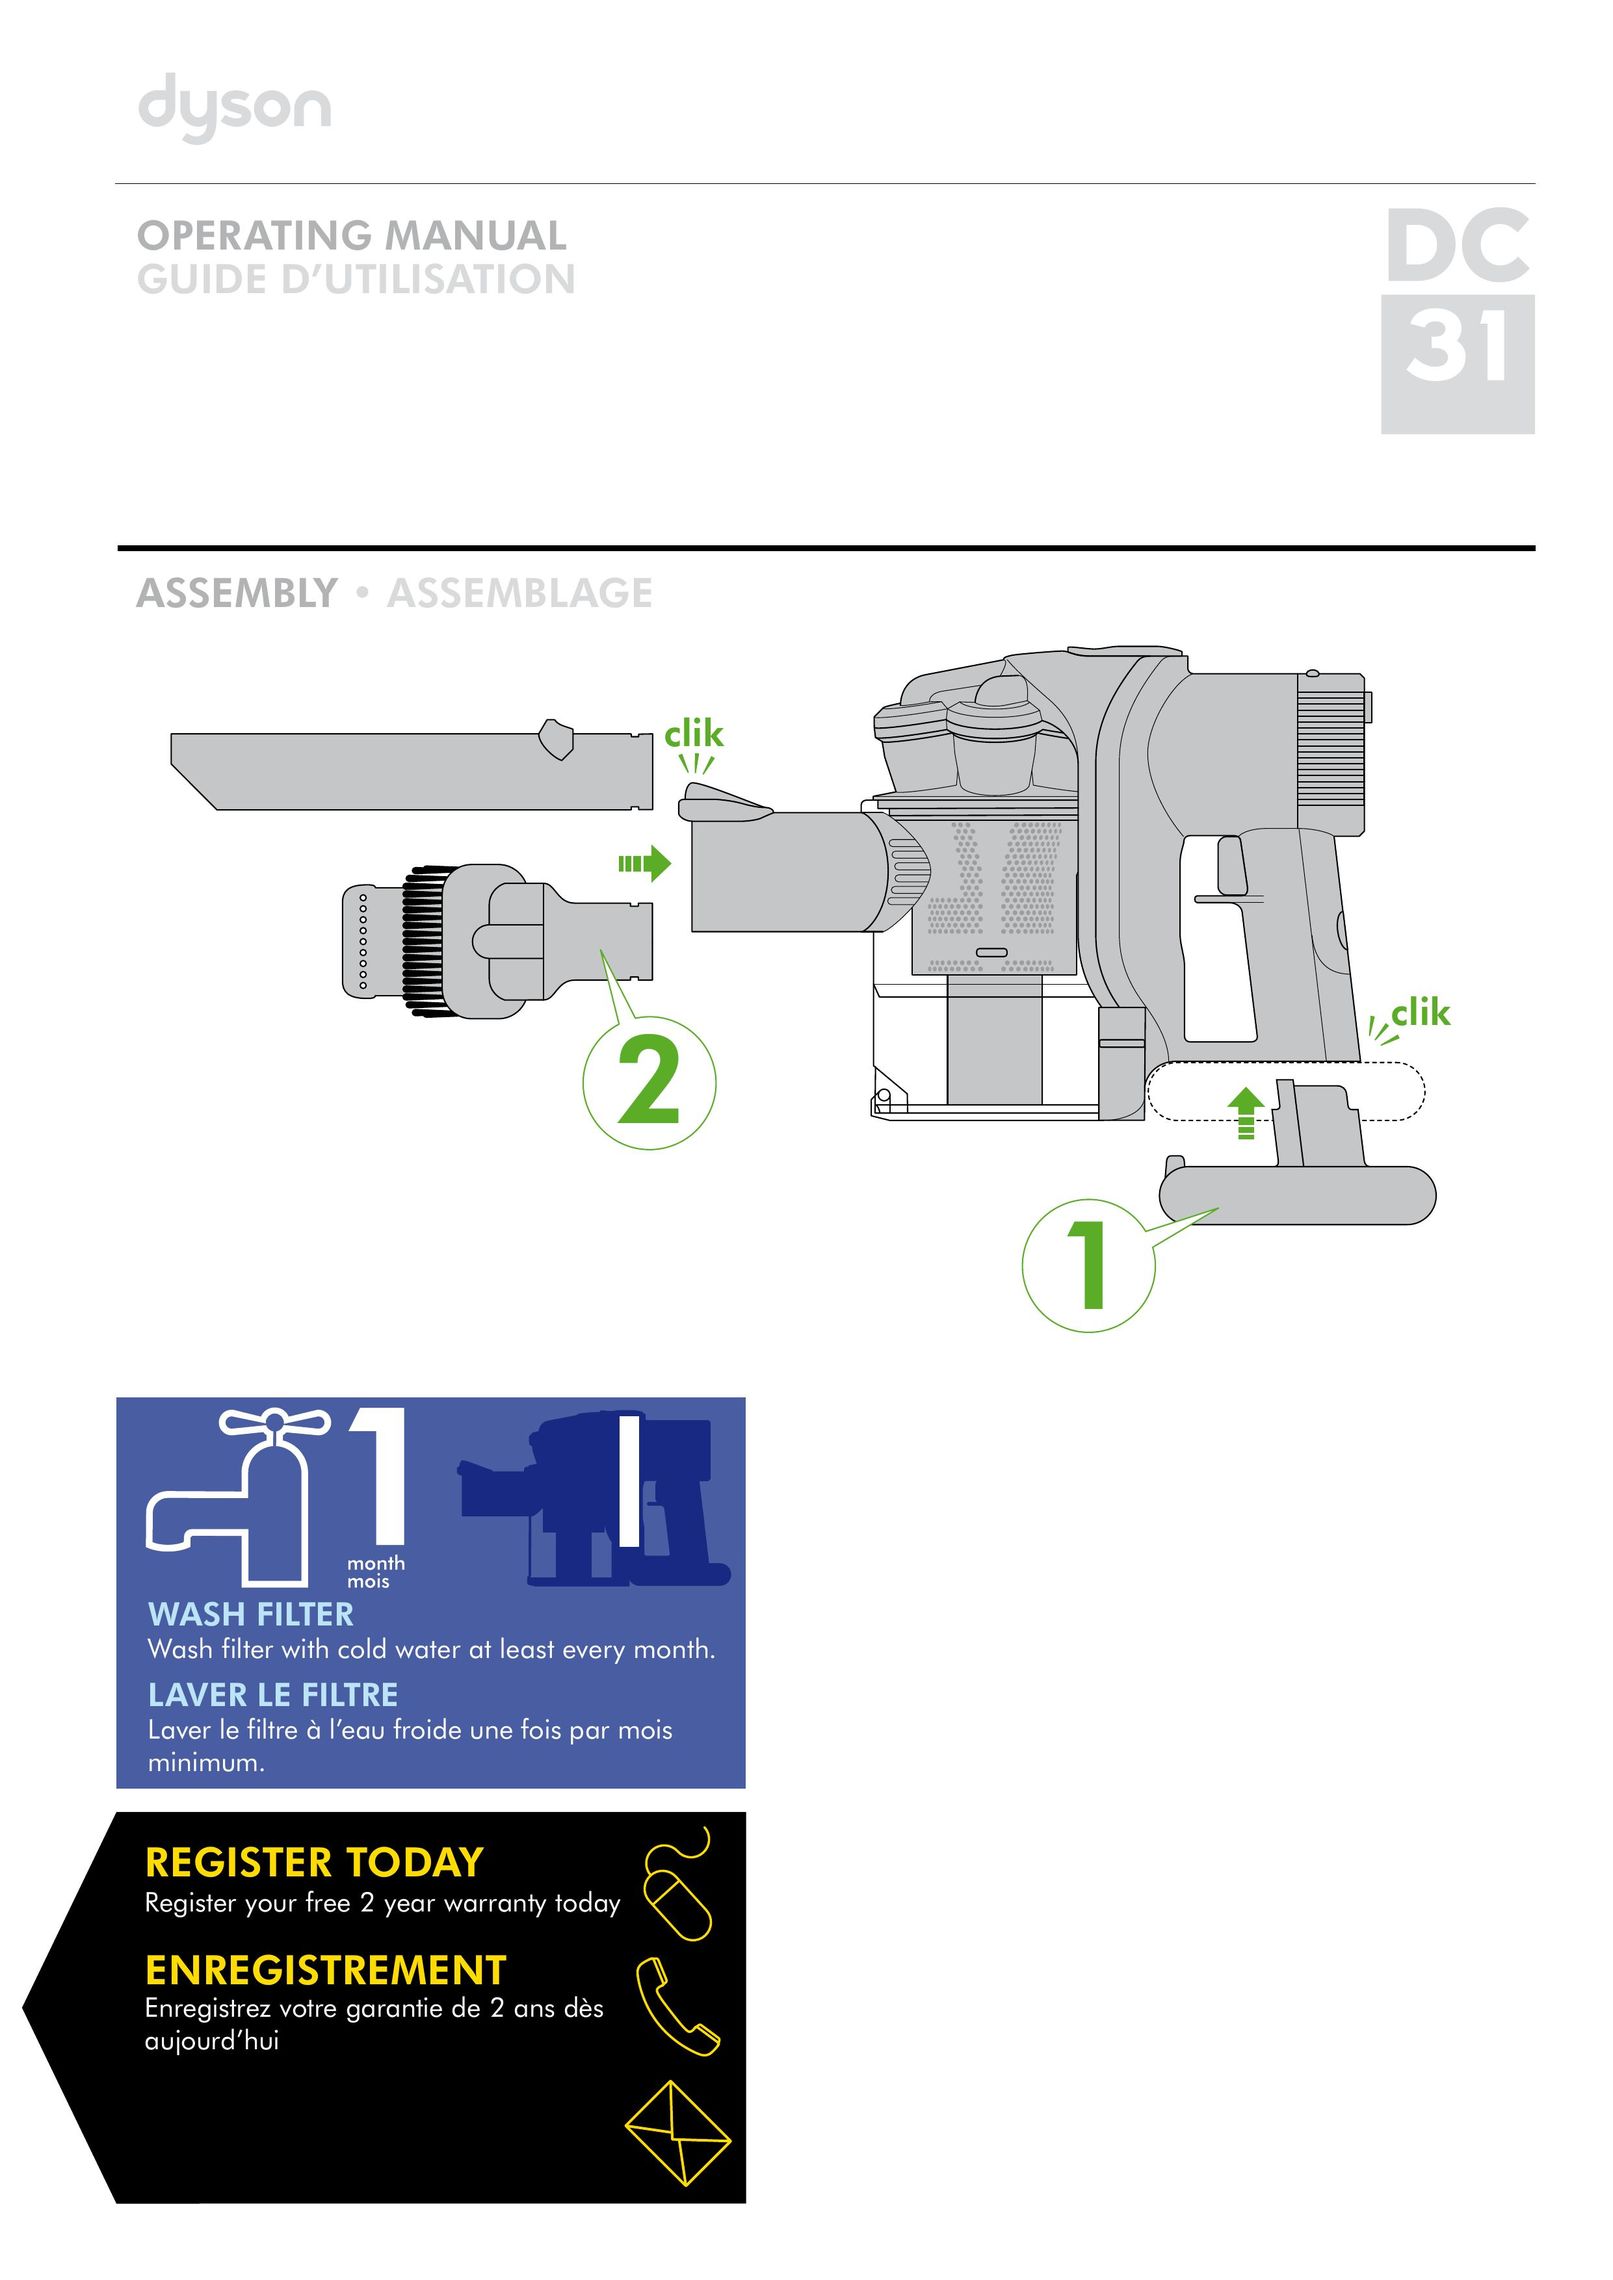 Dyson DC31 Vacuum Cleaner User Manual